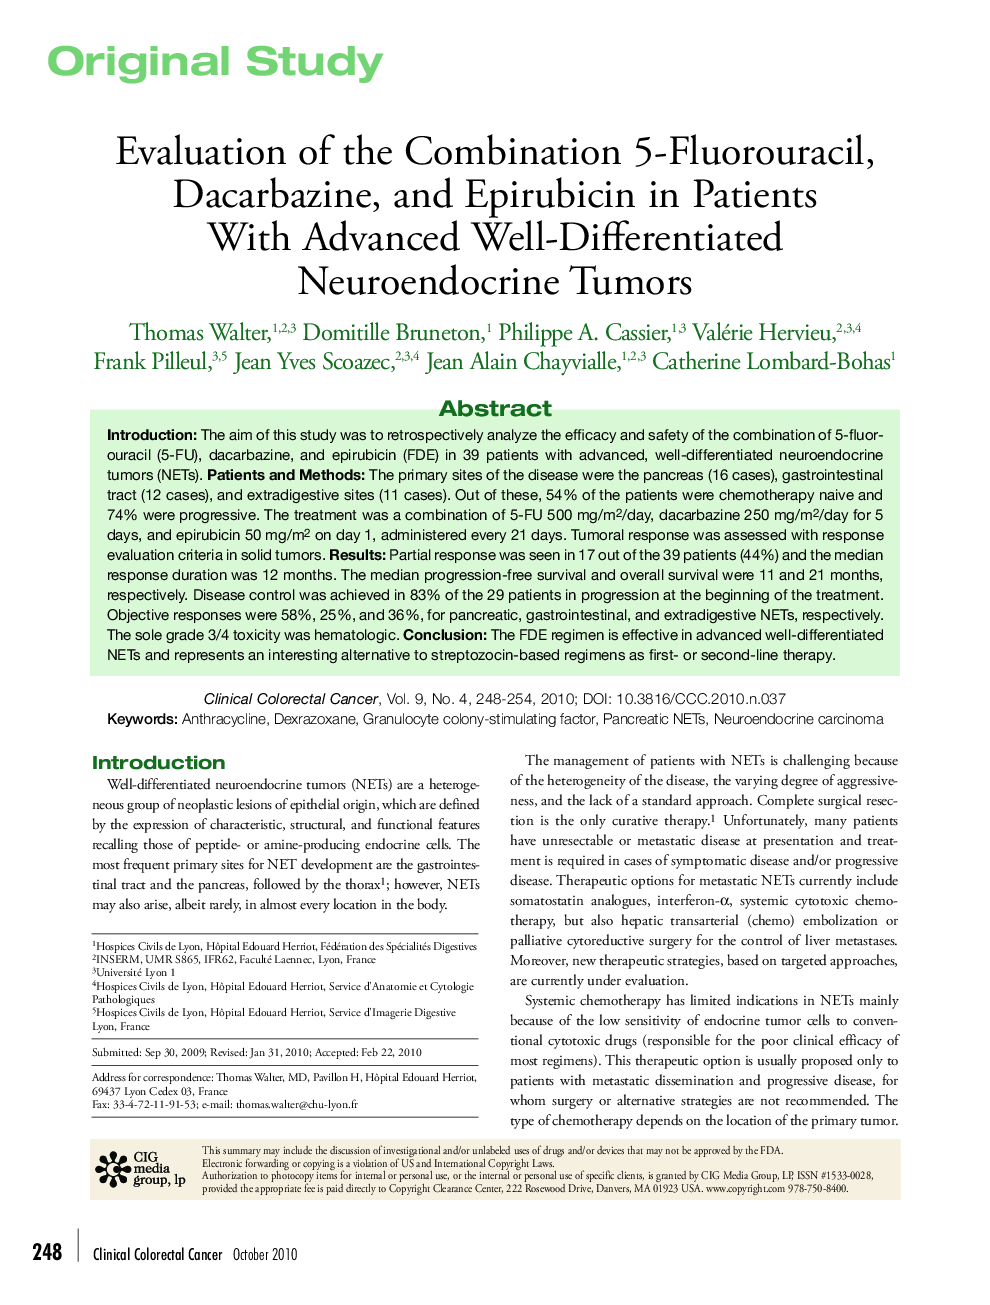 Evaluation of the Combination 5-Fluorouracil, Dacarbazine, and Epirubicin in Patients With Advanced Well-Differentiated Neuroendocrine Tumors 